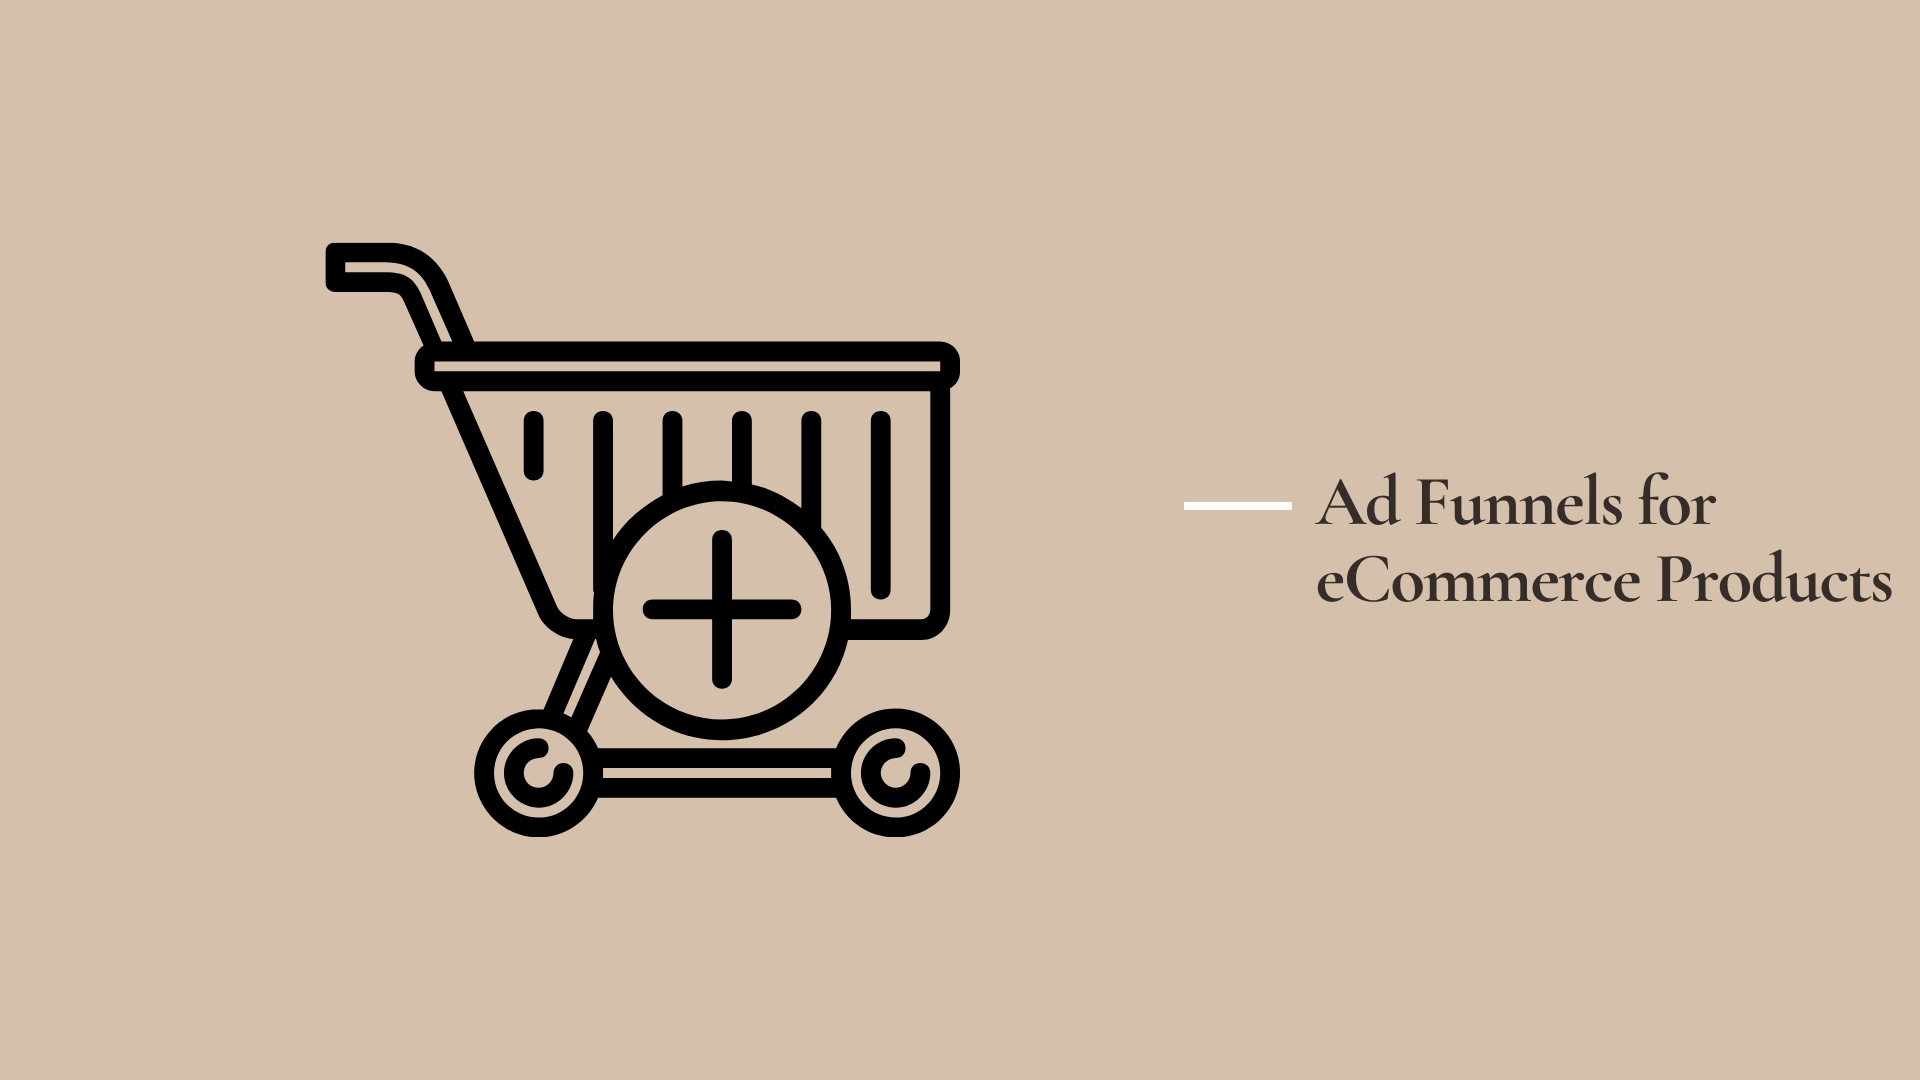 Ad Funnels for eCommerce Products